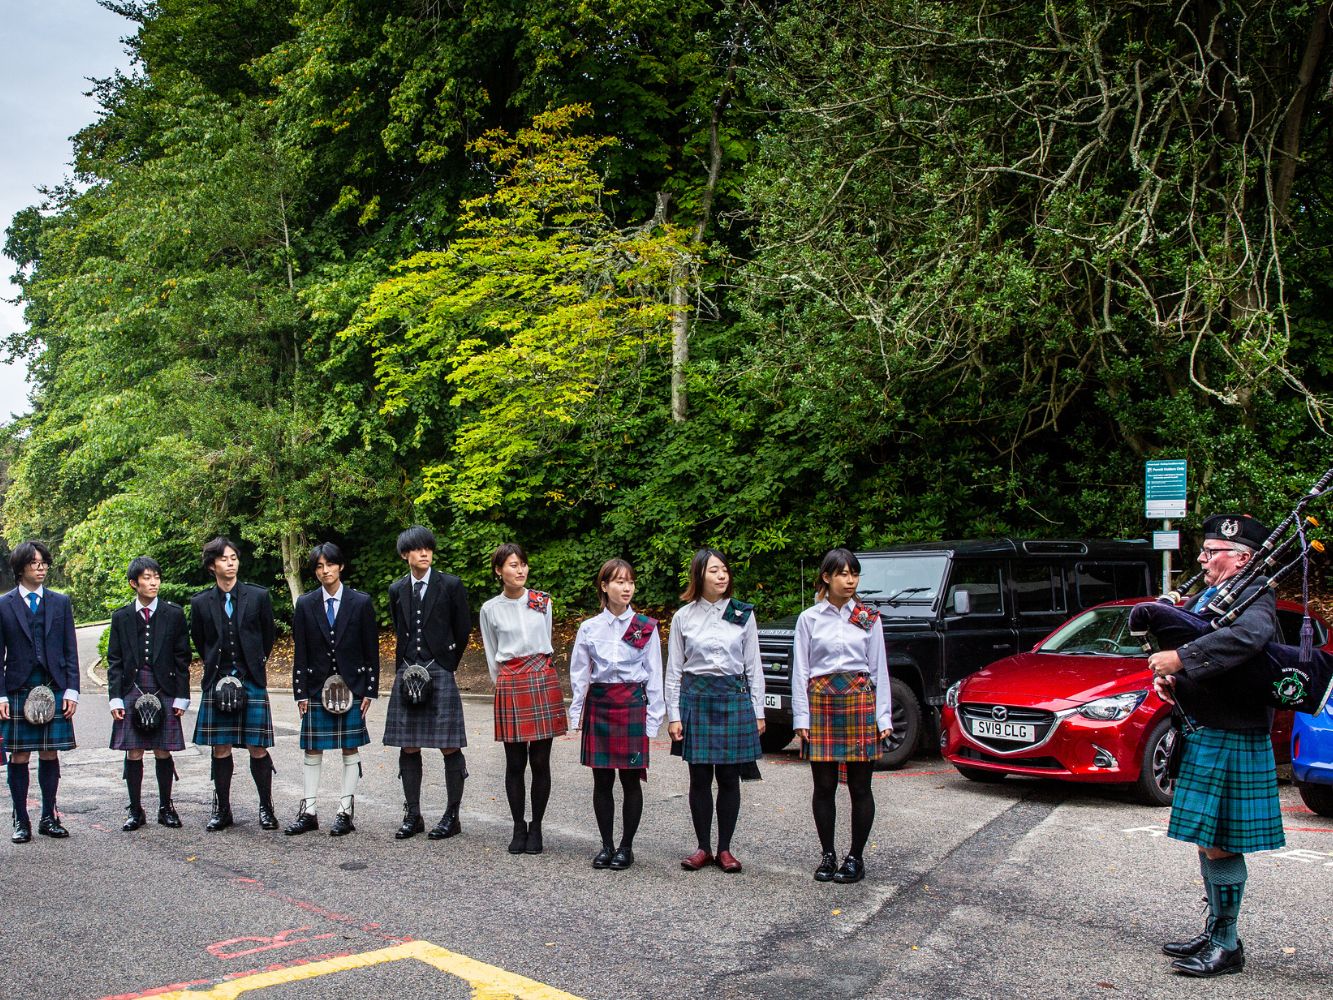 Japanese students in traditional Scottish dress accompanied by a bagpiper